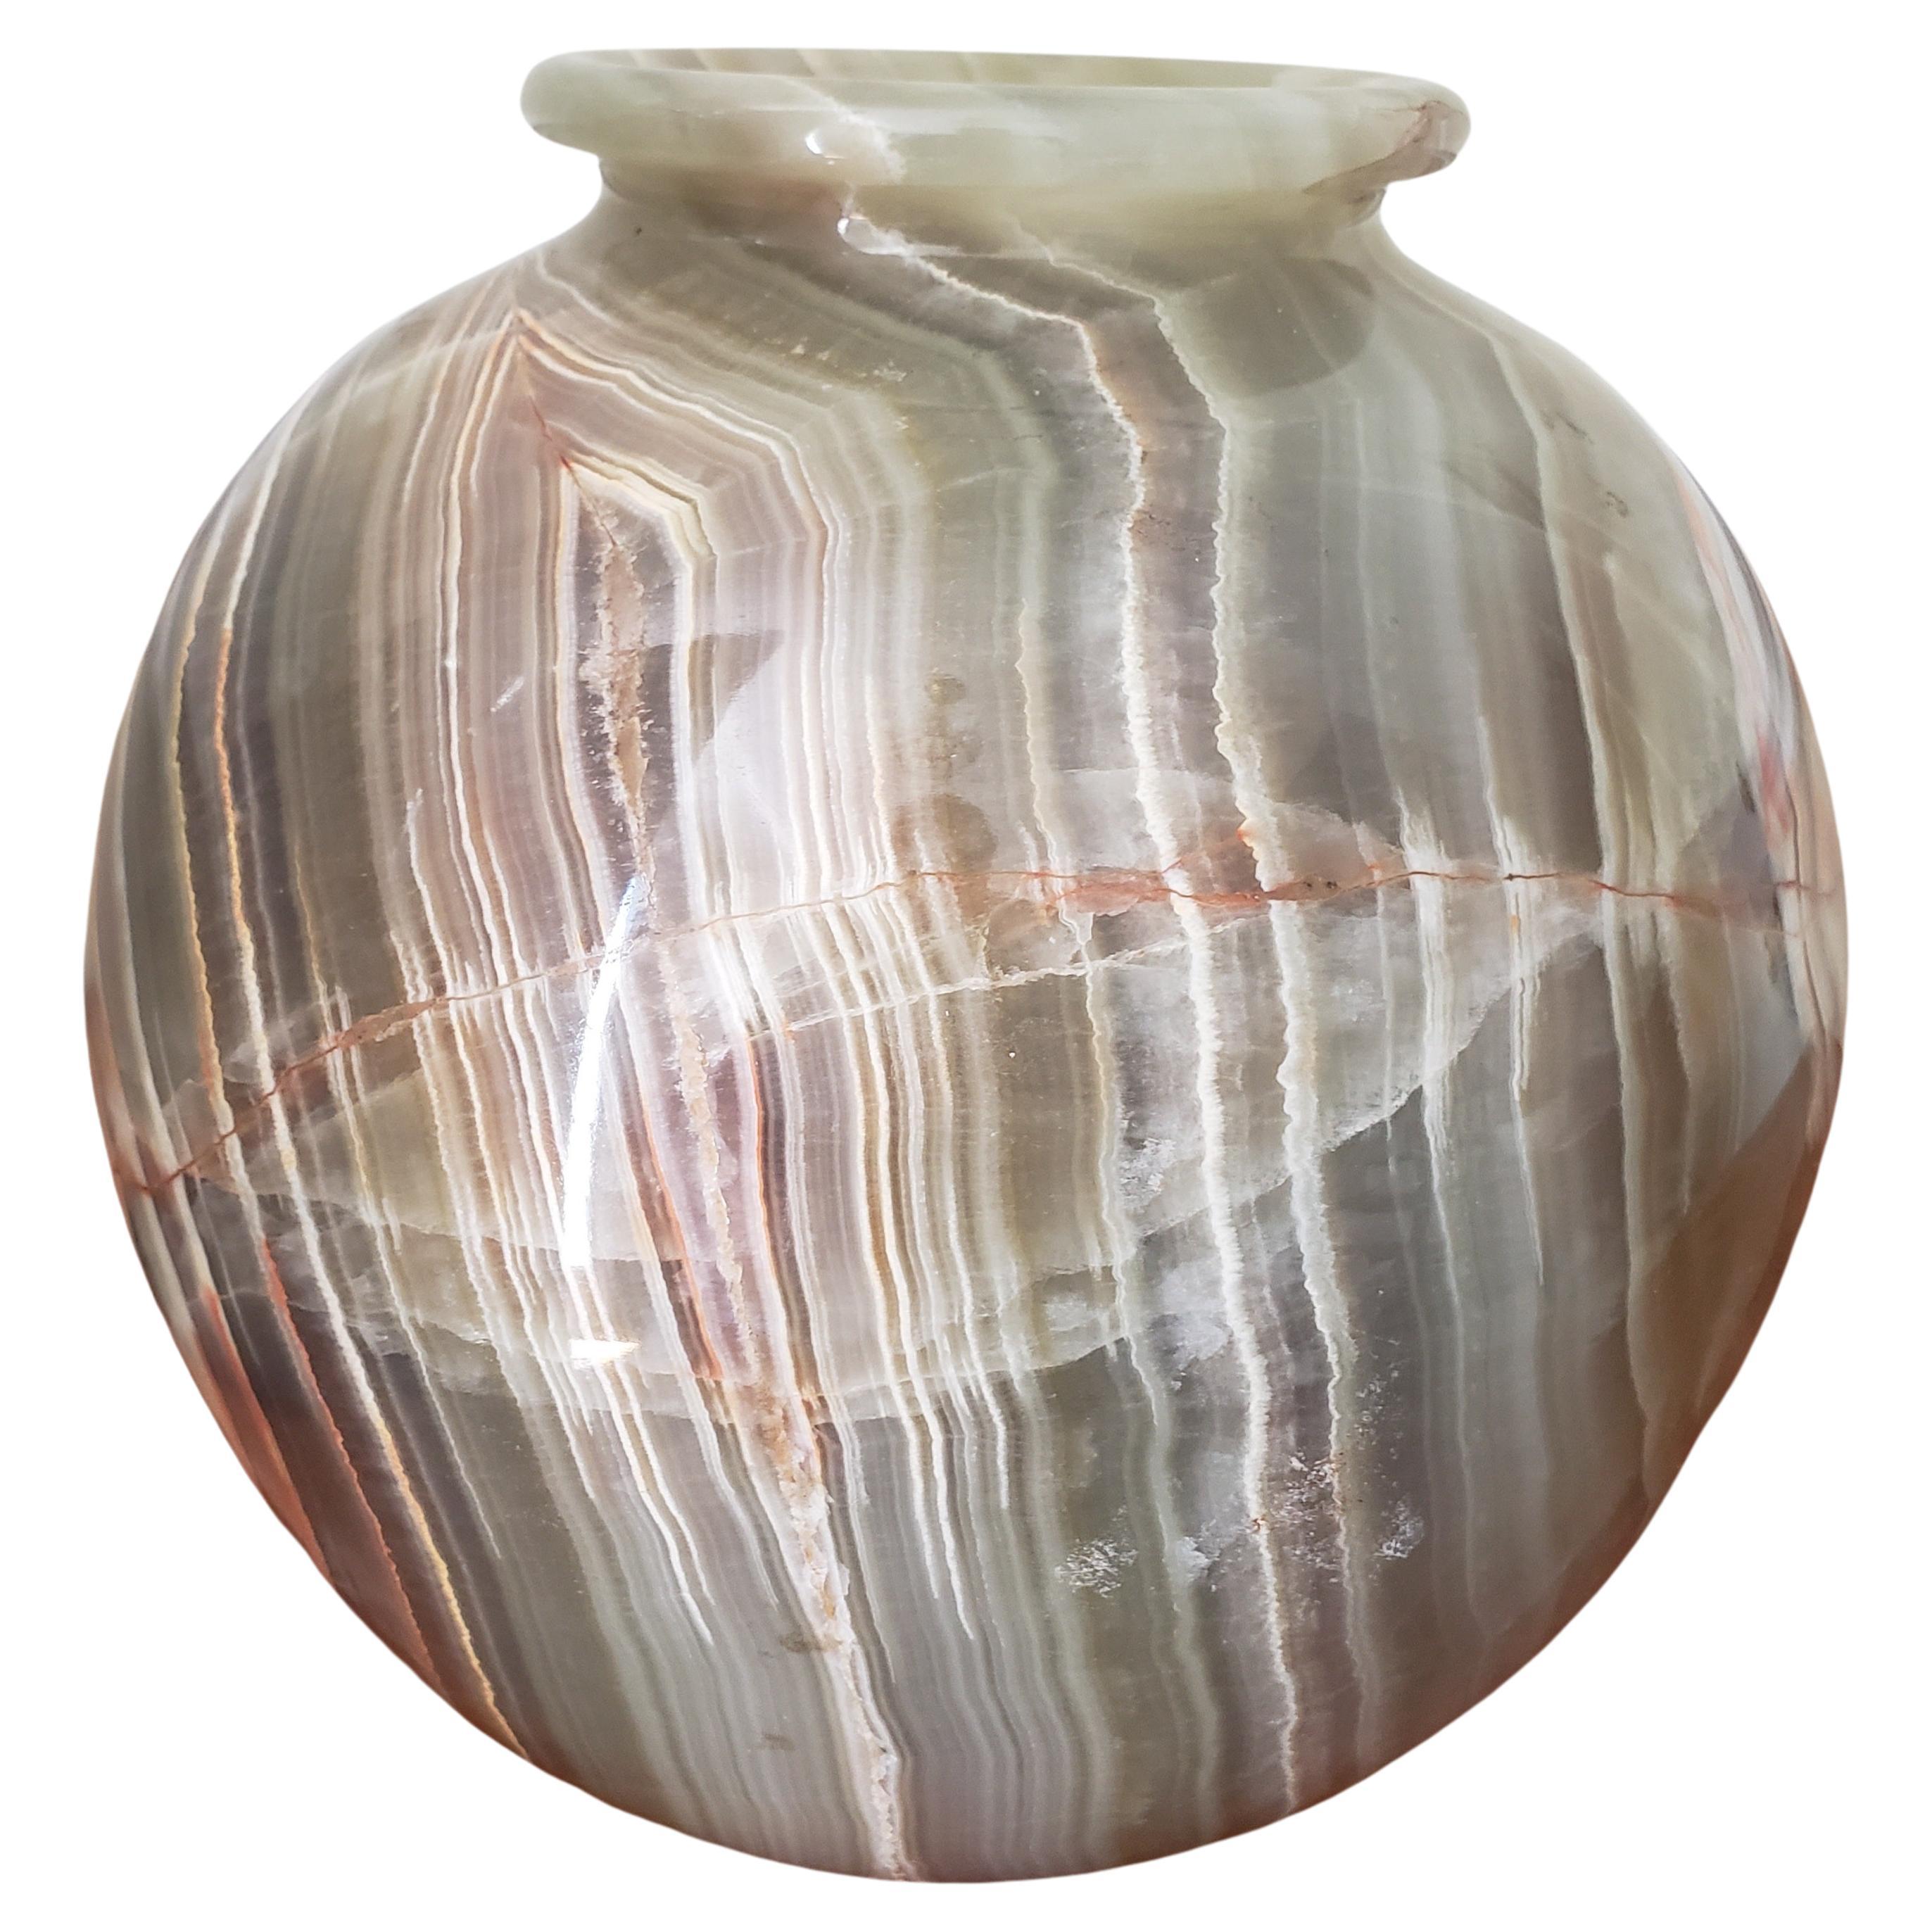 Mid-Century Modern vase carved from a single block of highly figured onyx marble. Primarily rich gray emerald colour with hundreds of alternating veins, some of white and some of red. Appropriate for multiple decor styles.
Measures 10